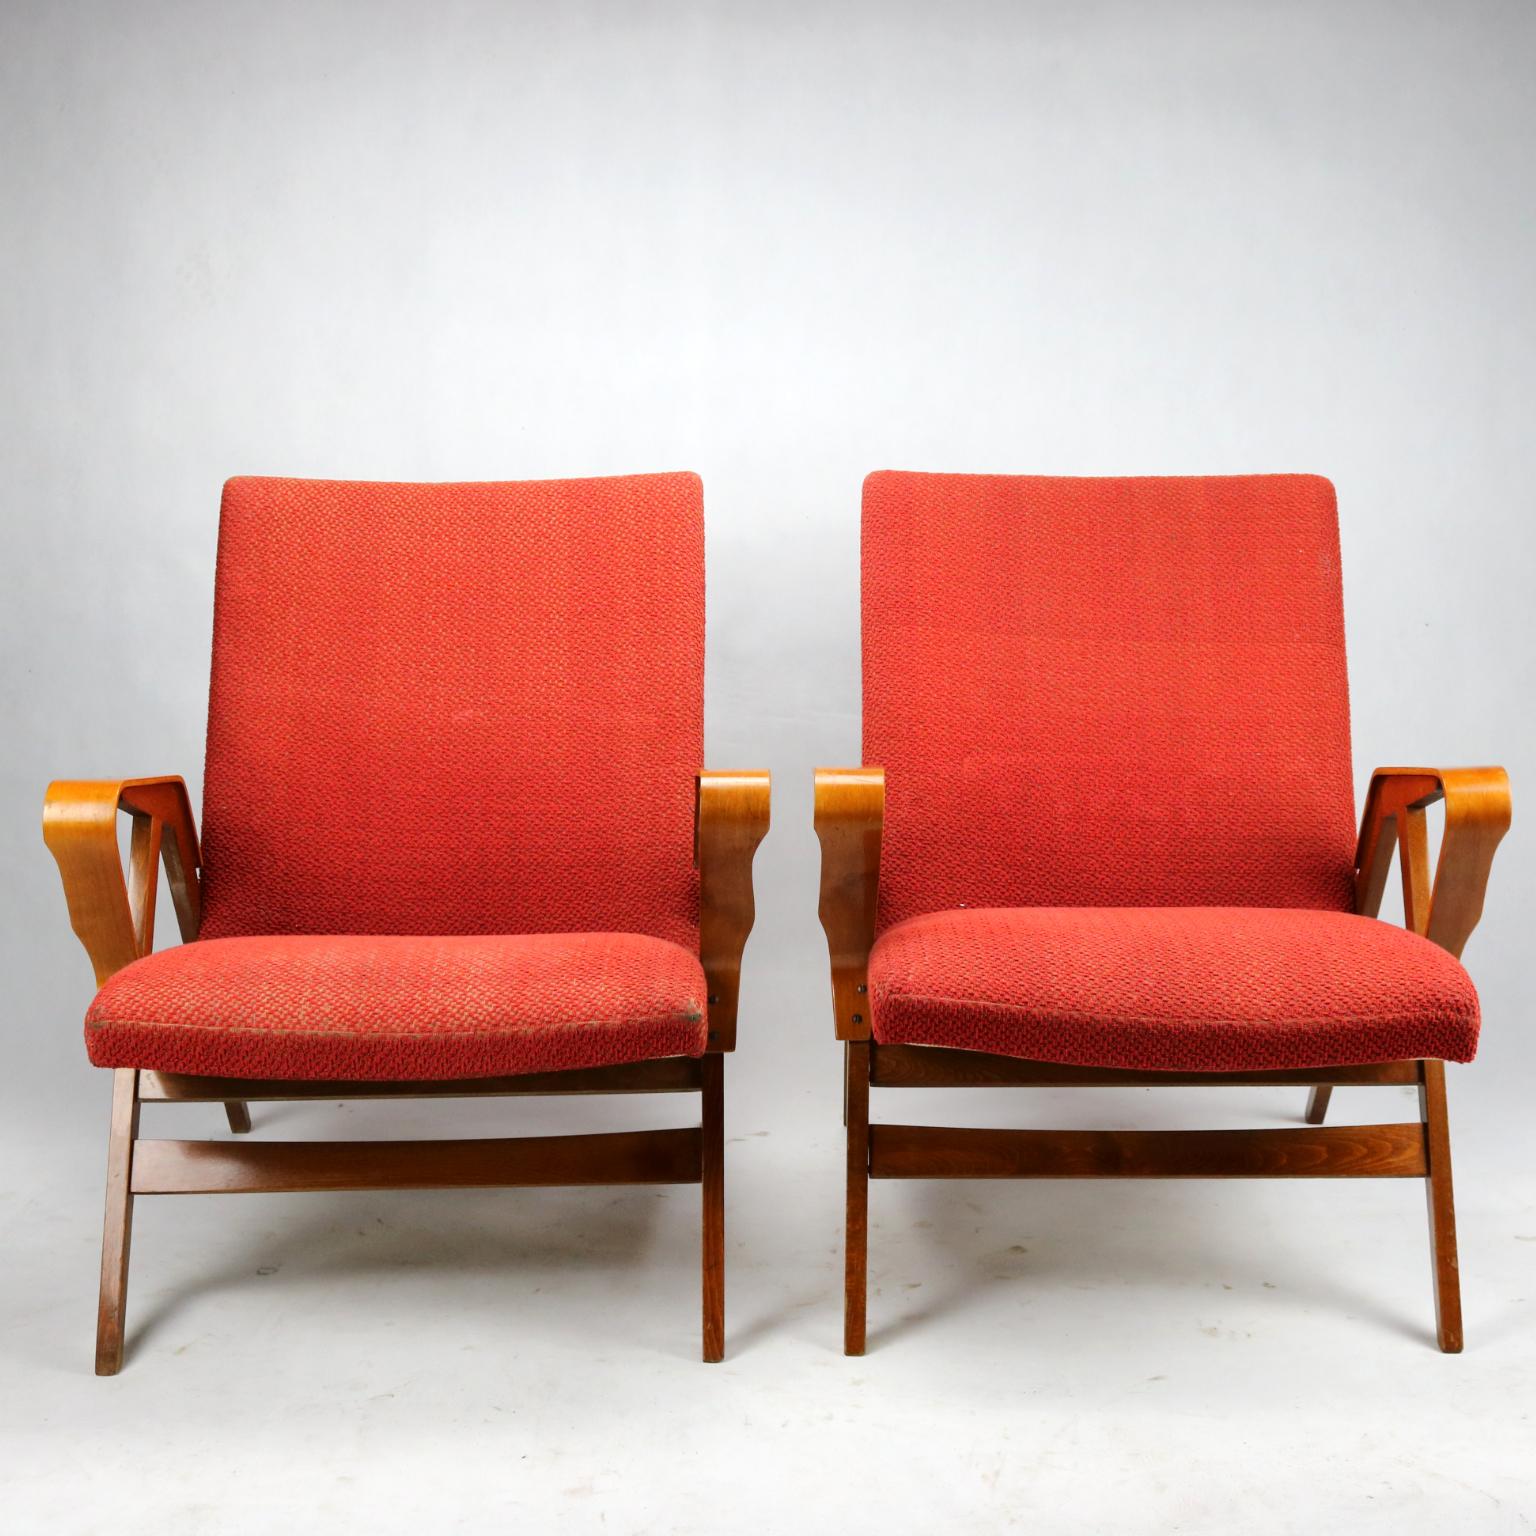 Armchairs produced by Tatra Nábytok Czechoslovakia, in the 1960s in original red upholstery.
The chairs are in a good vintage condition, upholstery is worn out, but wood is in a perfect condition.
Very comfortable model.
Price for one piece.
By